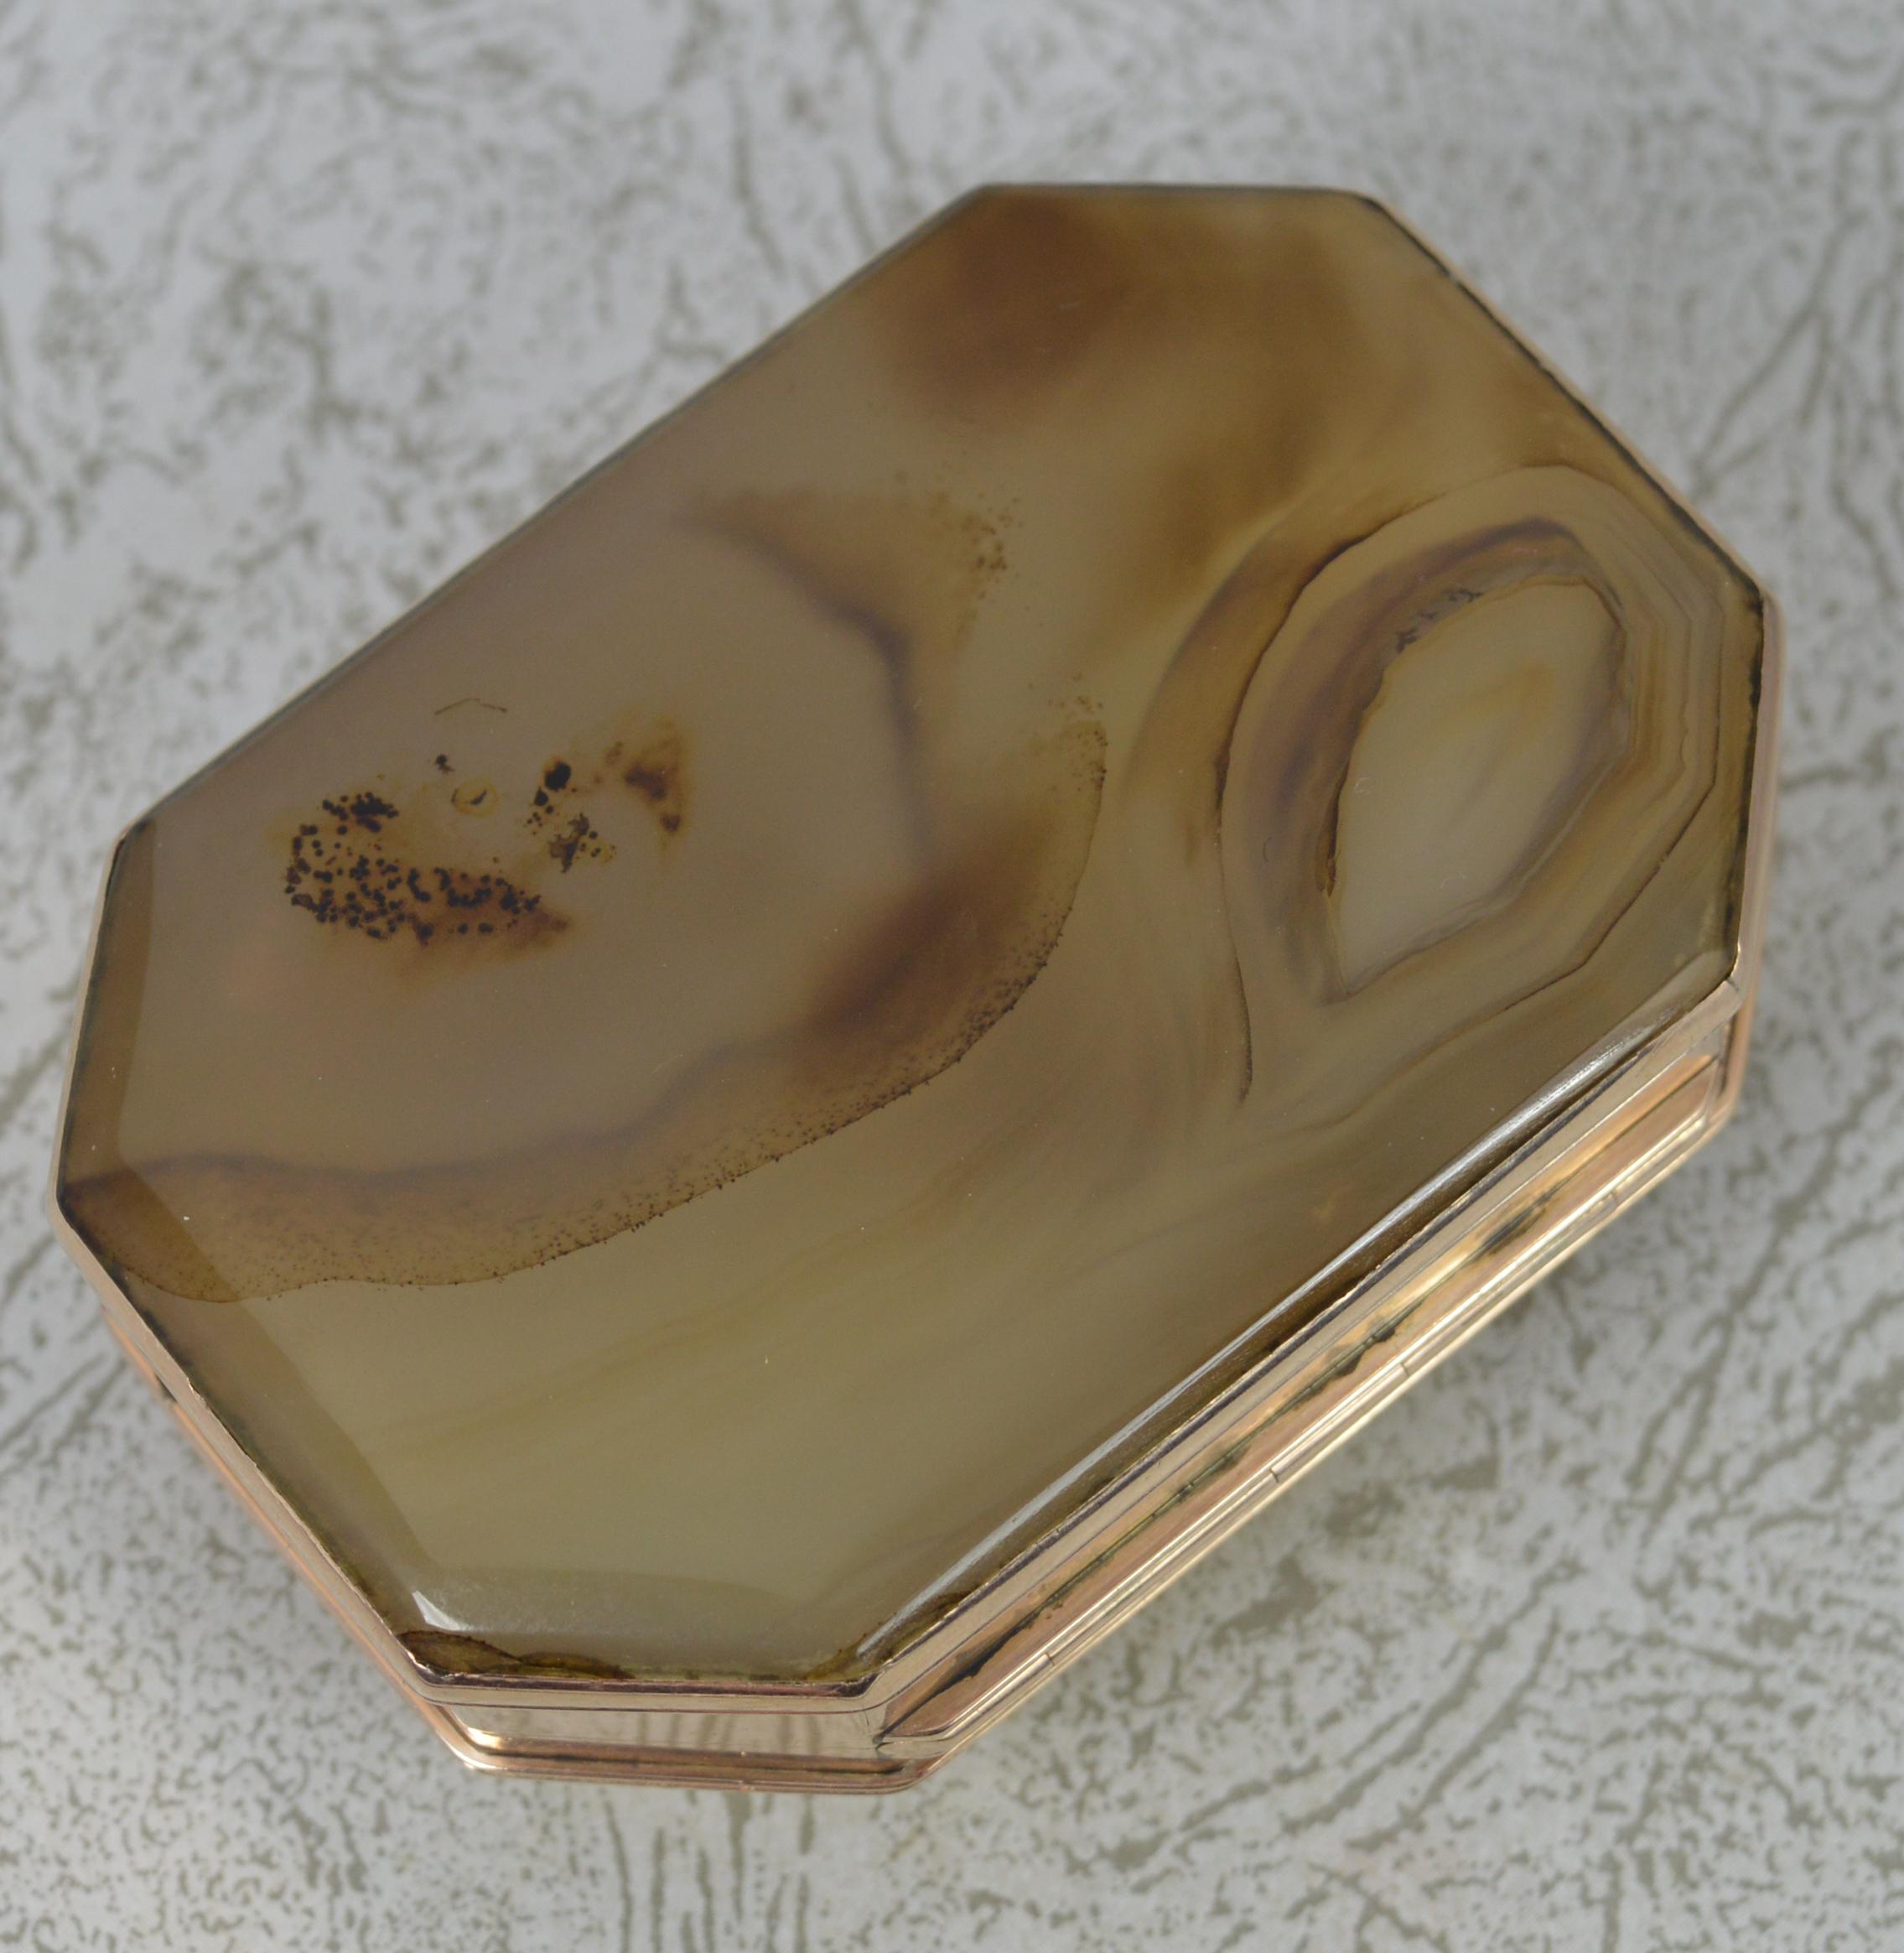 A very rare and fine quality box.
A Georgian period example, circa 1790 - 1810.
Rectangular shaped example in 15 carat rose gold. The front with a finely engraved crest, The top and base set with a single piece of moss or dendritic agate.

CONDITION